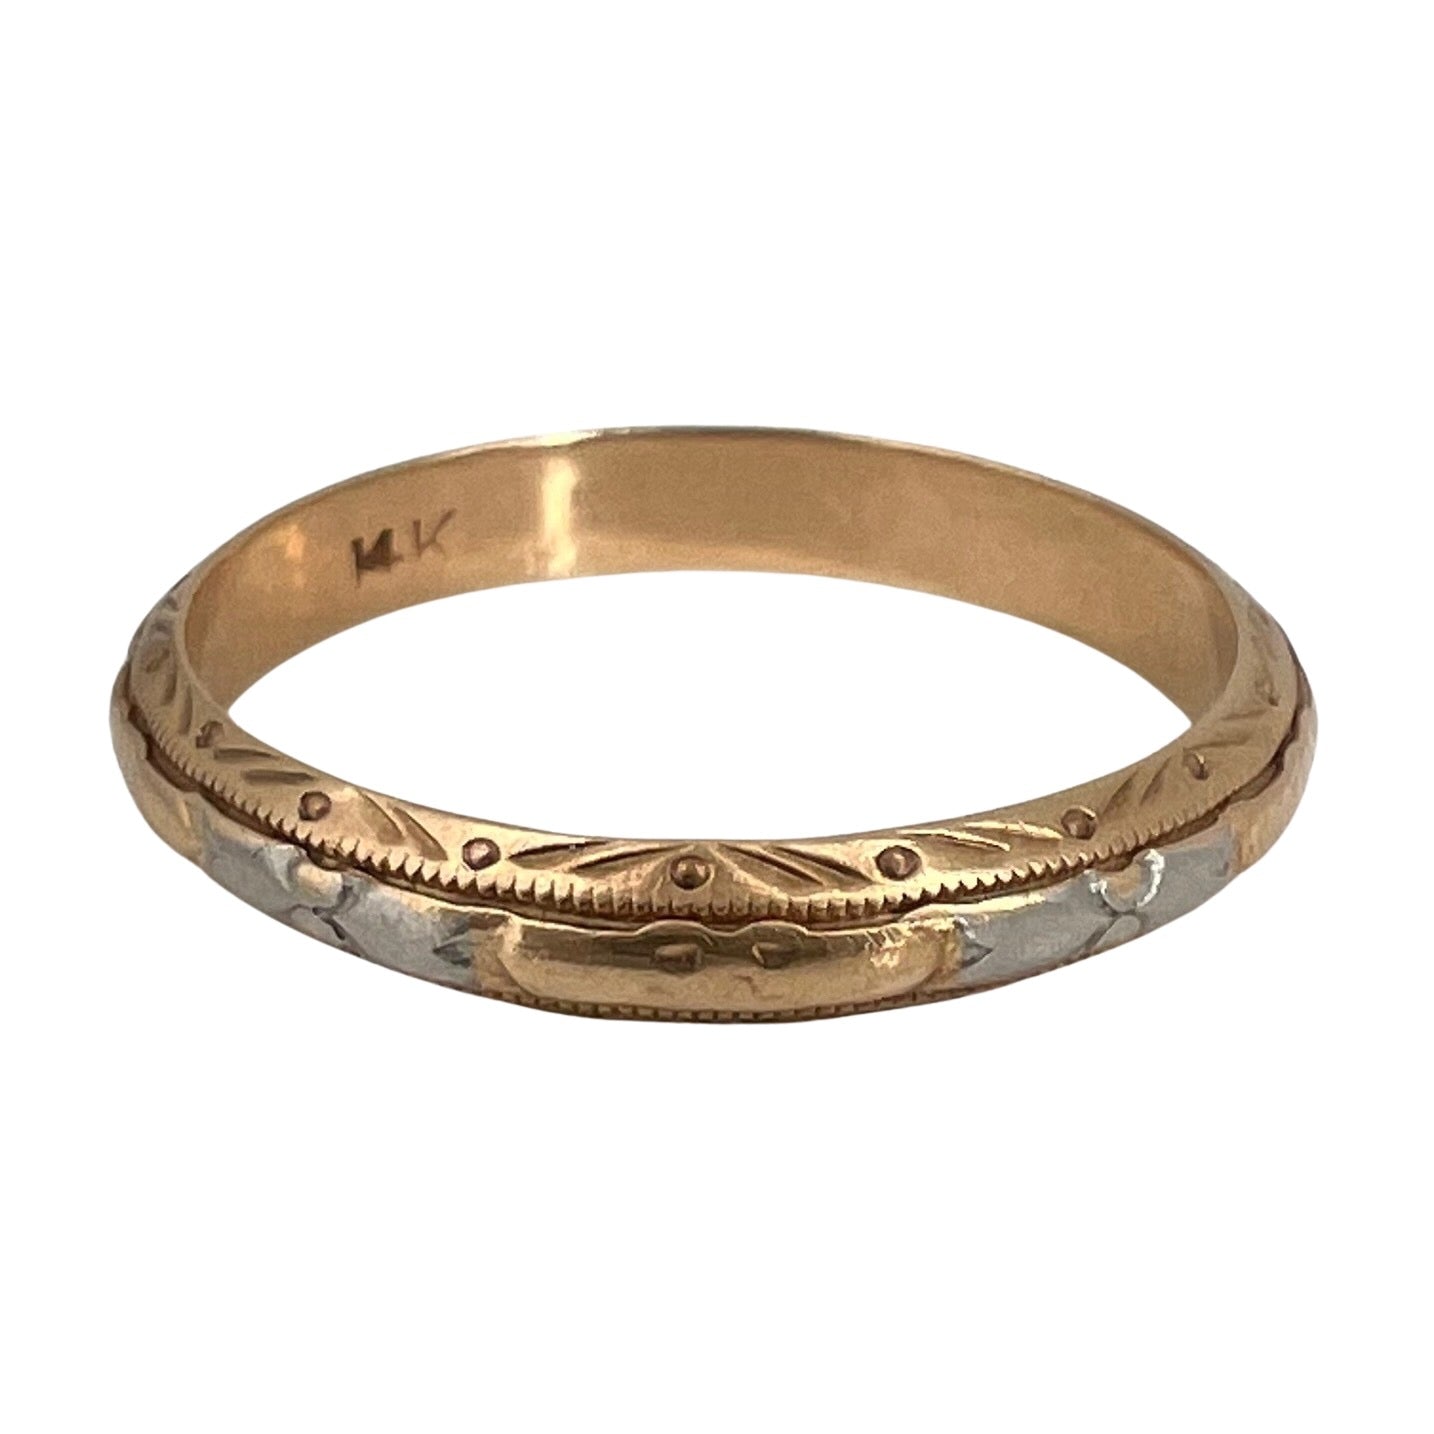 V I N T A G E // look closer / 14k yellow gold ring with white gold overlay / size 7 to 7.25